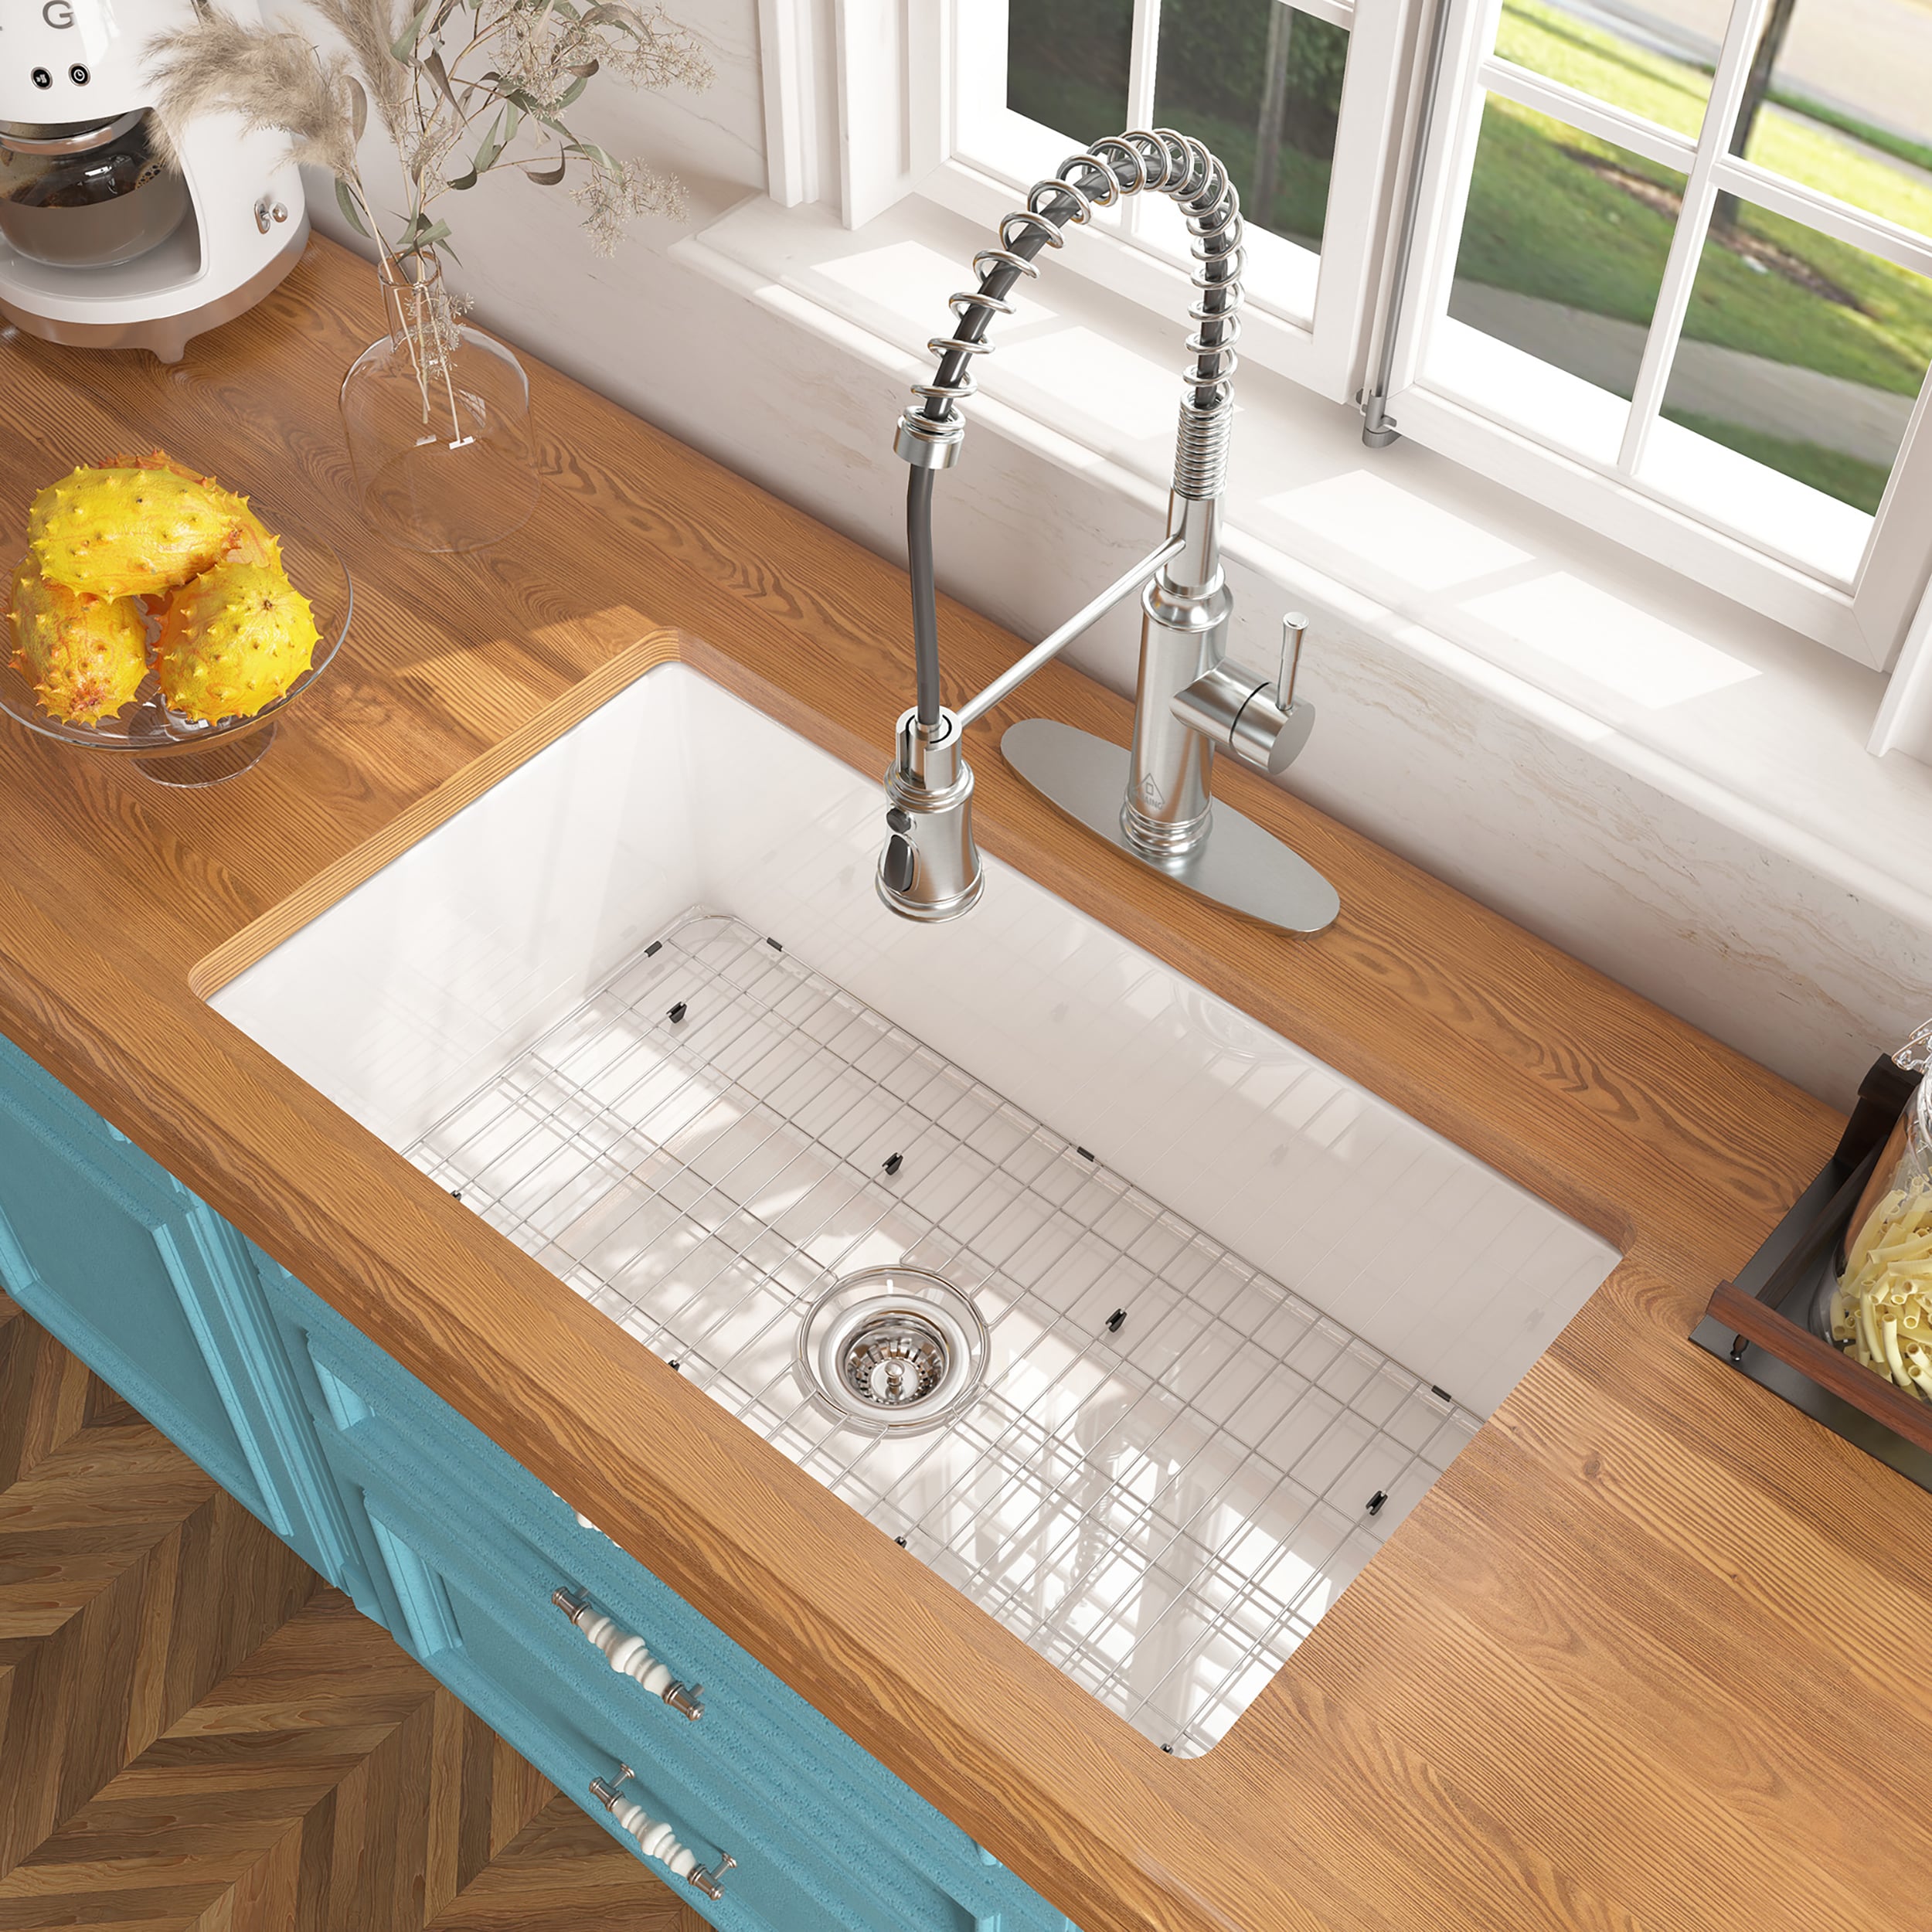 Utensils And Ornaments On Shelf Above Kitchen Sink With Golden Tap